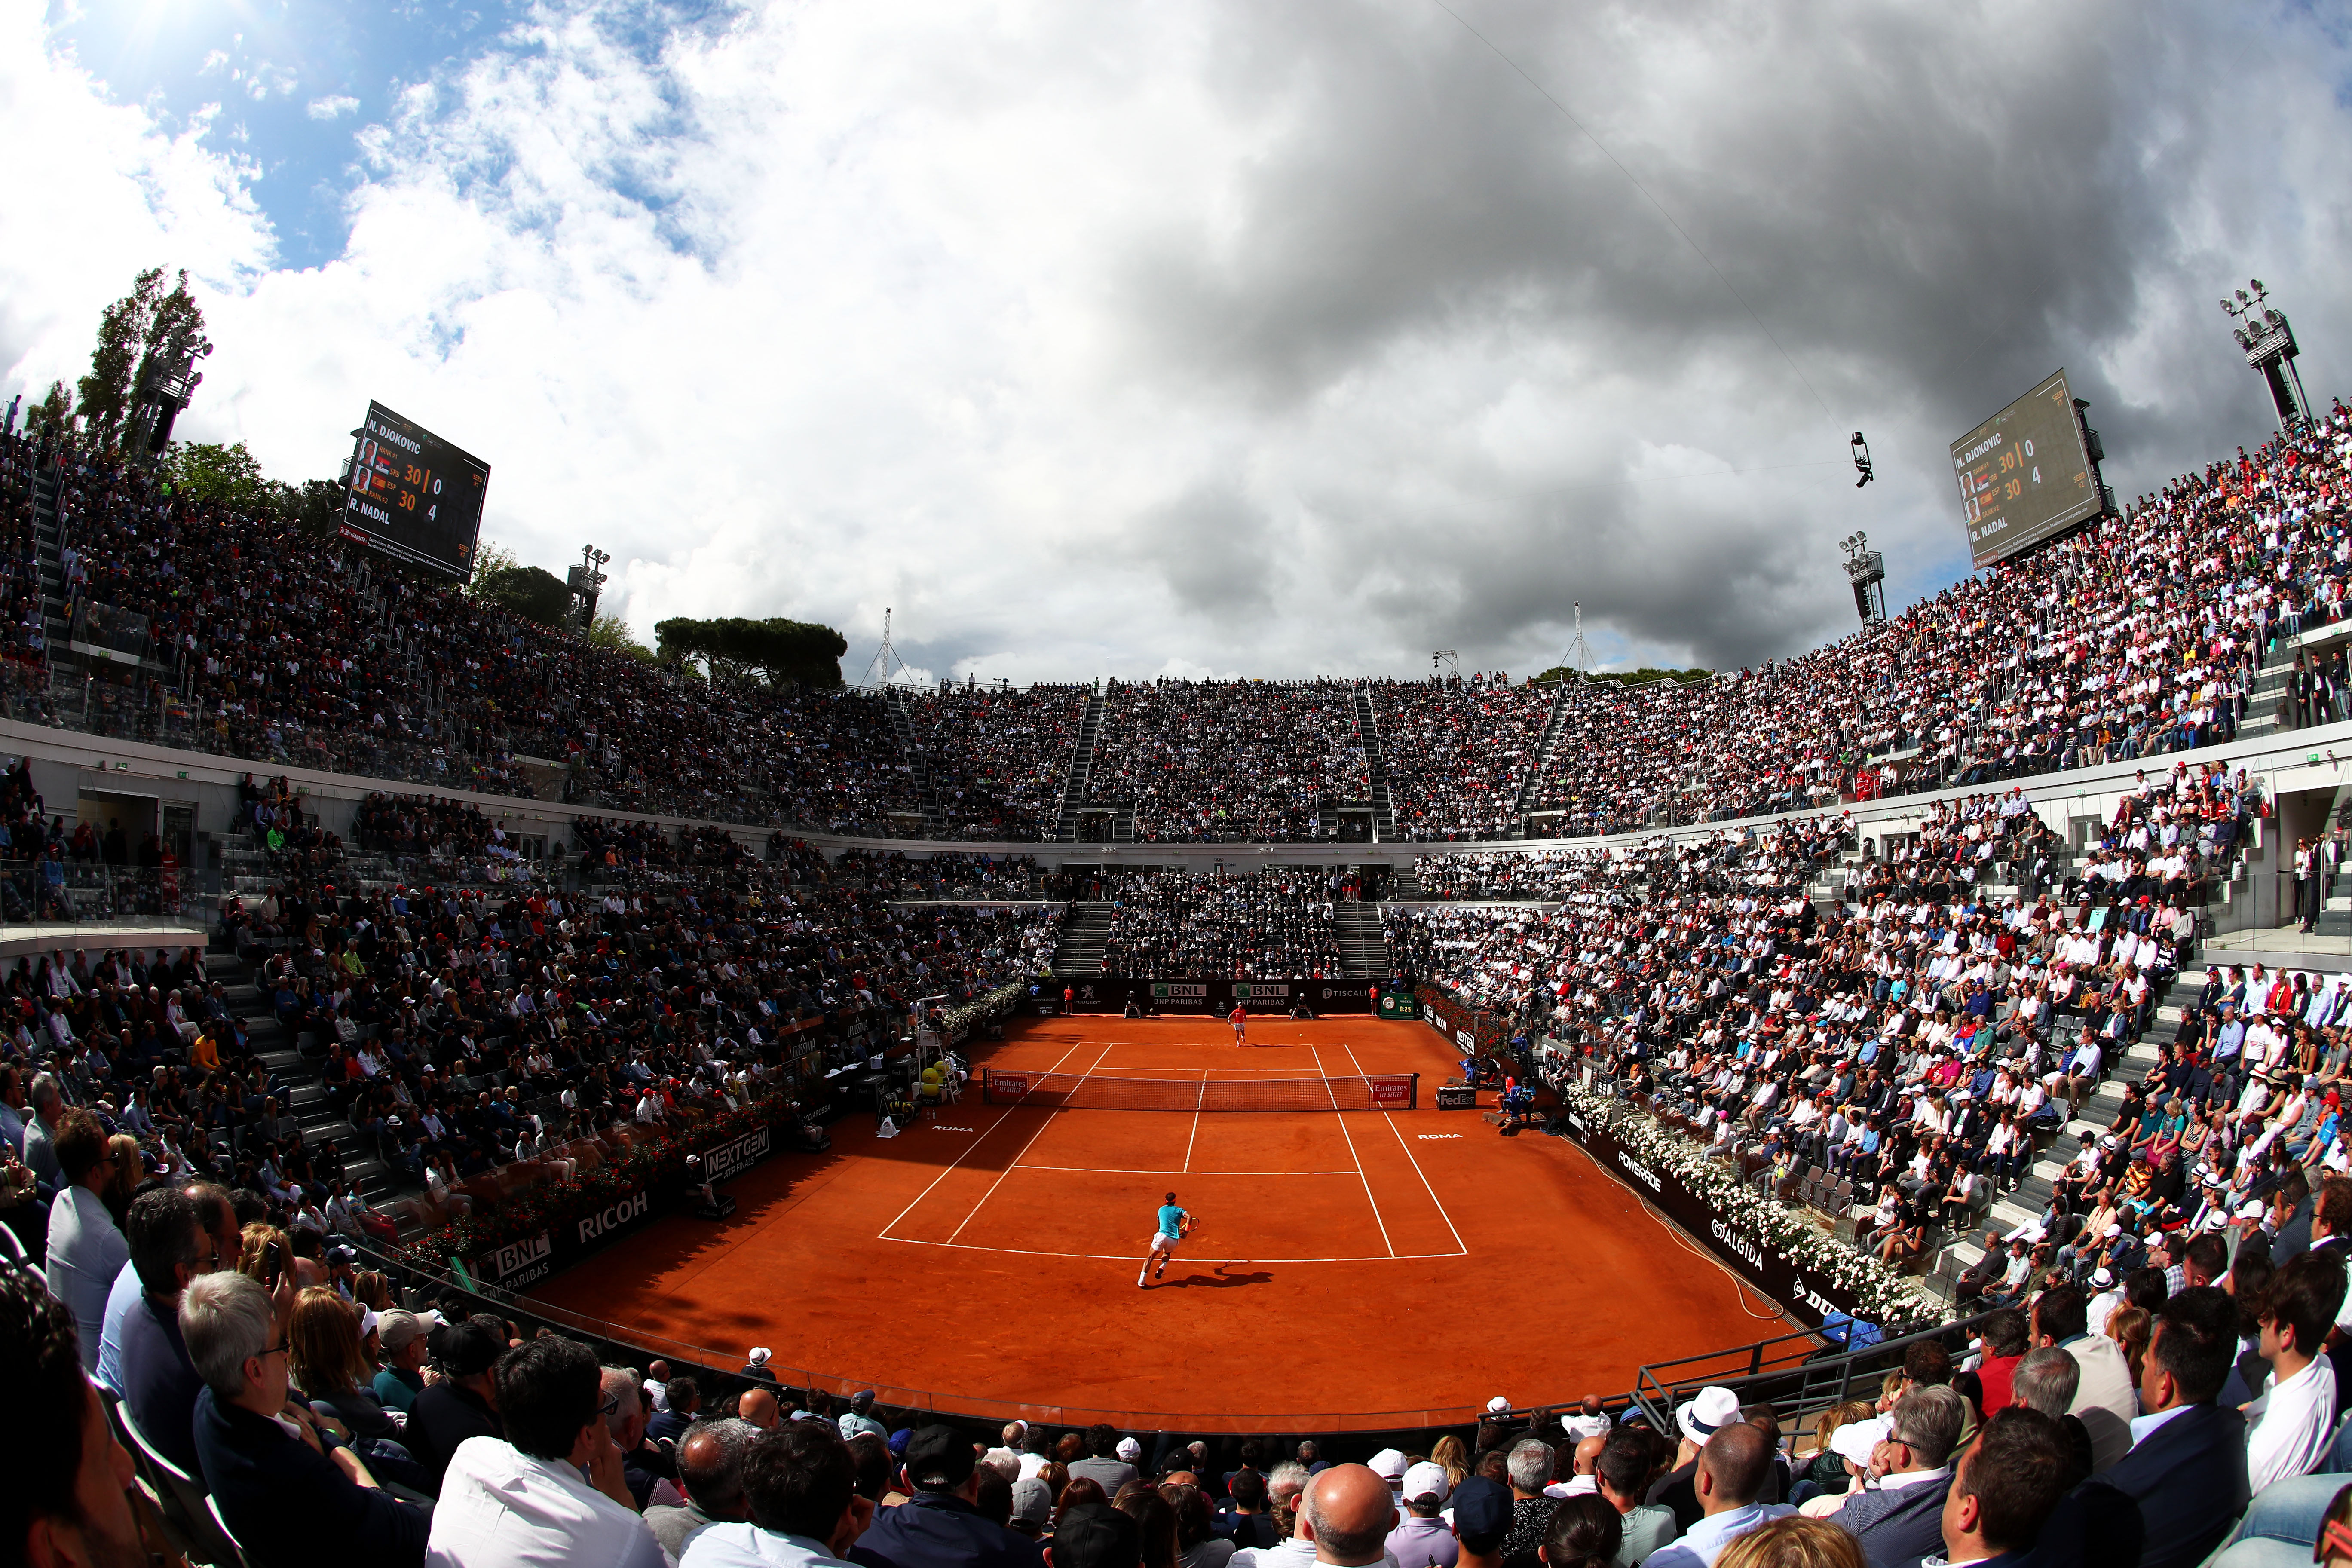 synder Køb Tilslutte Rome could be rescheduled, says Italian Tennis Federation